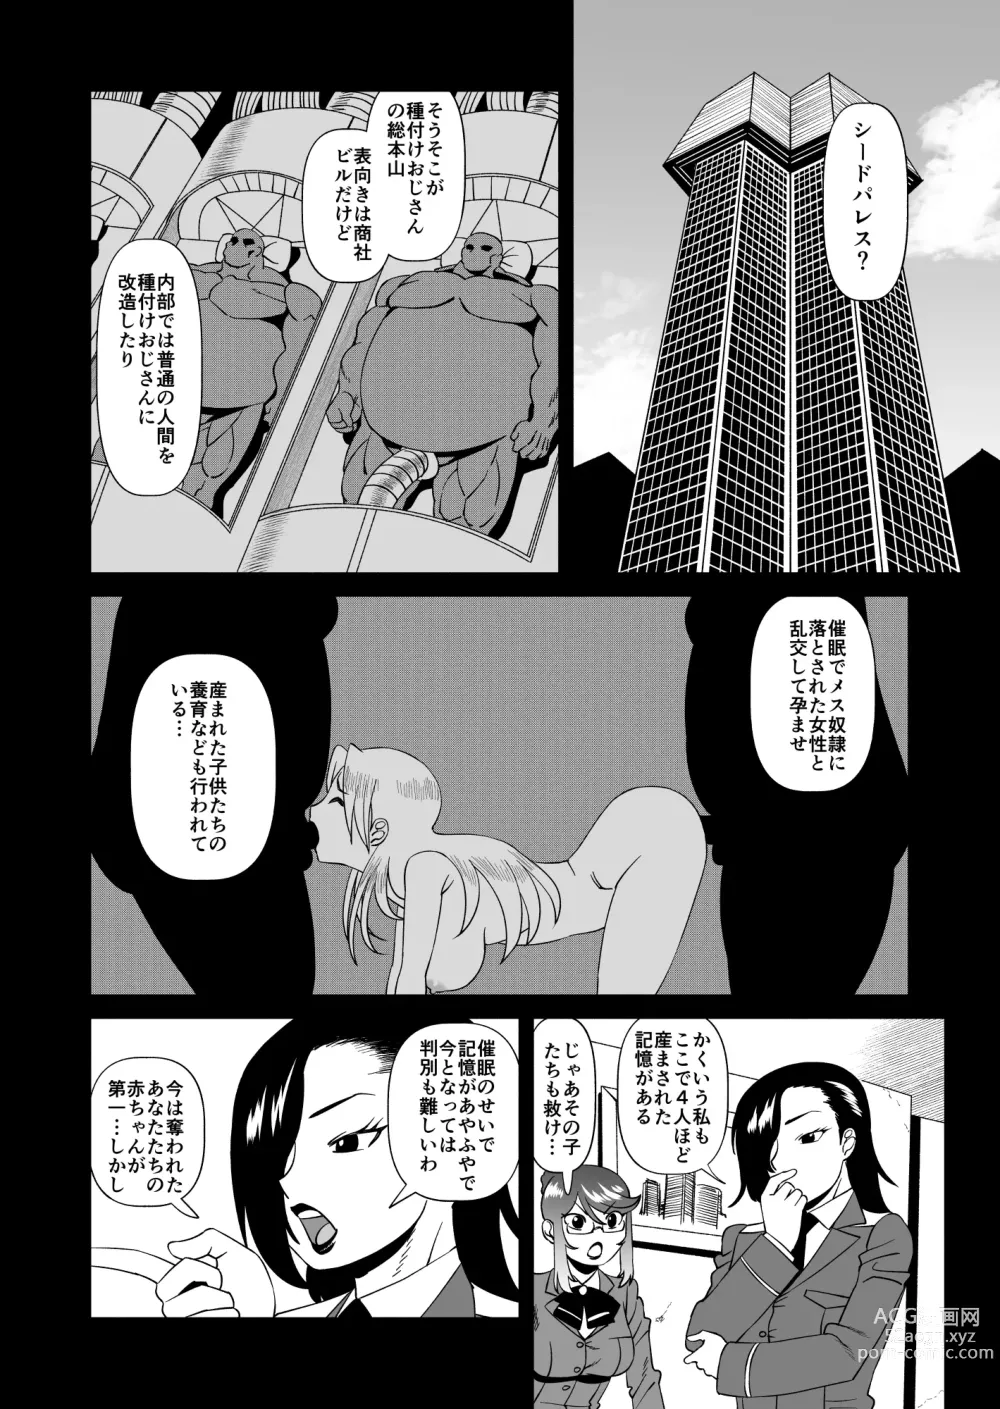 Page 13 of doujinshi CASTRATER 4